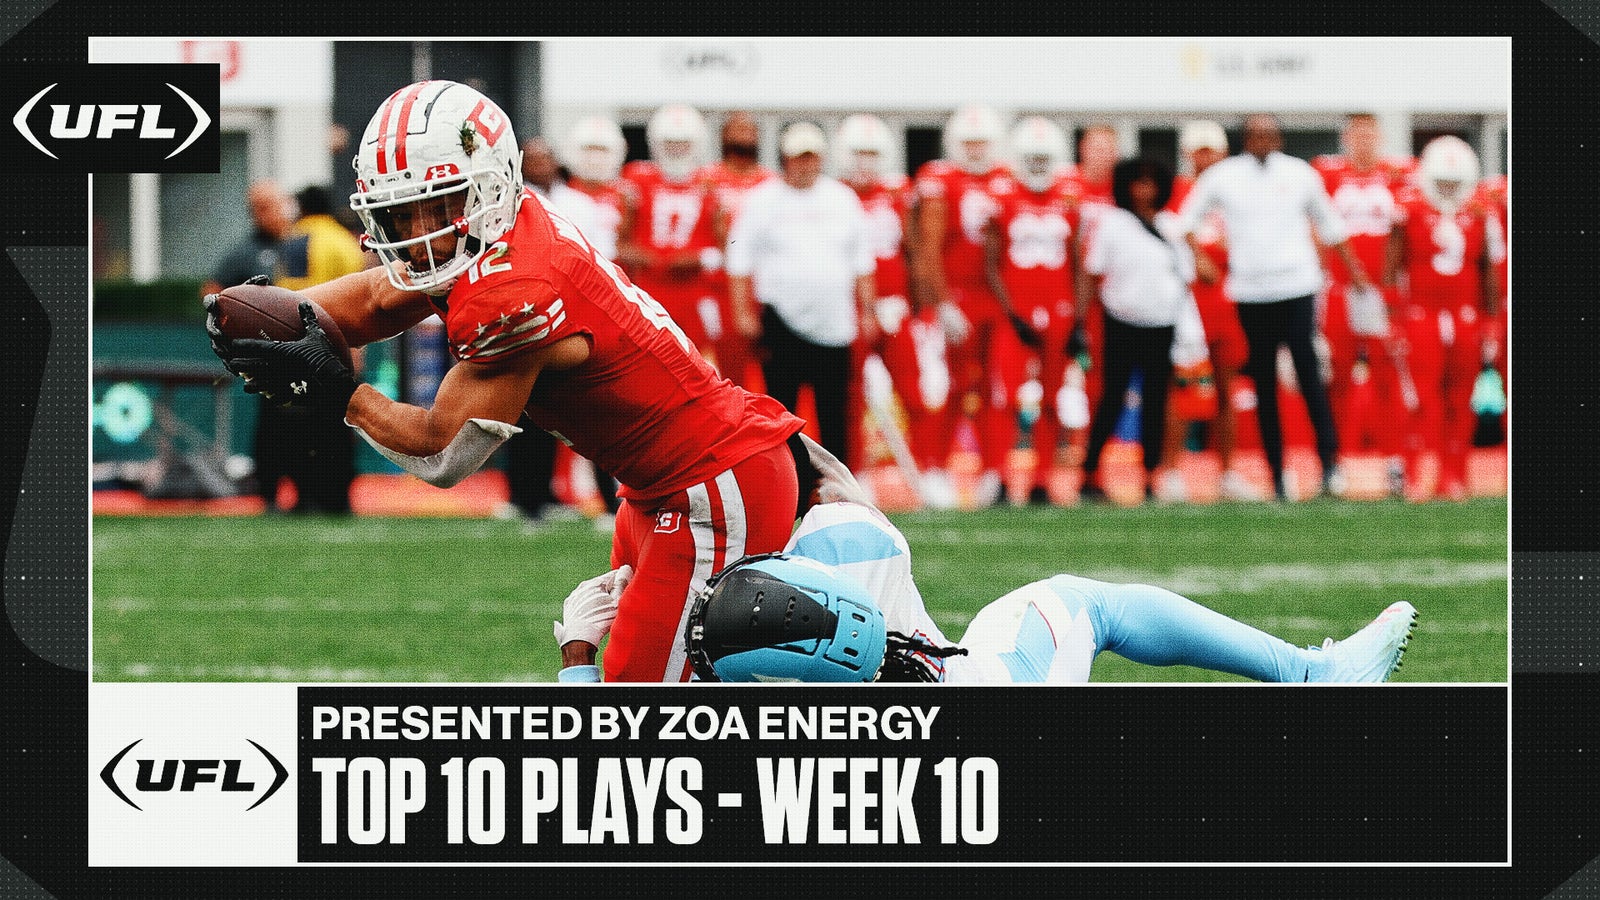 UFL top 10 plays from week 10 presented by ZOA Energy